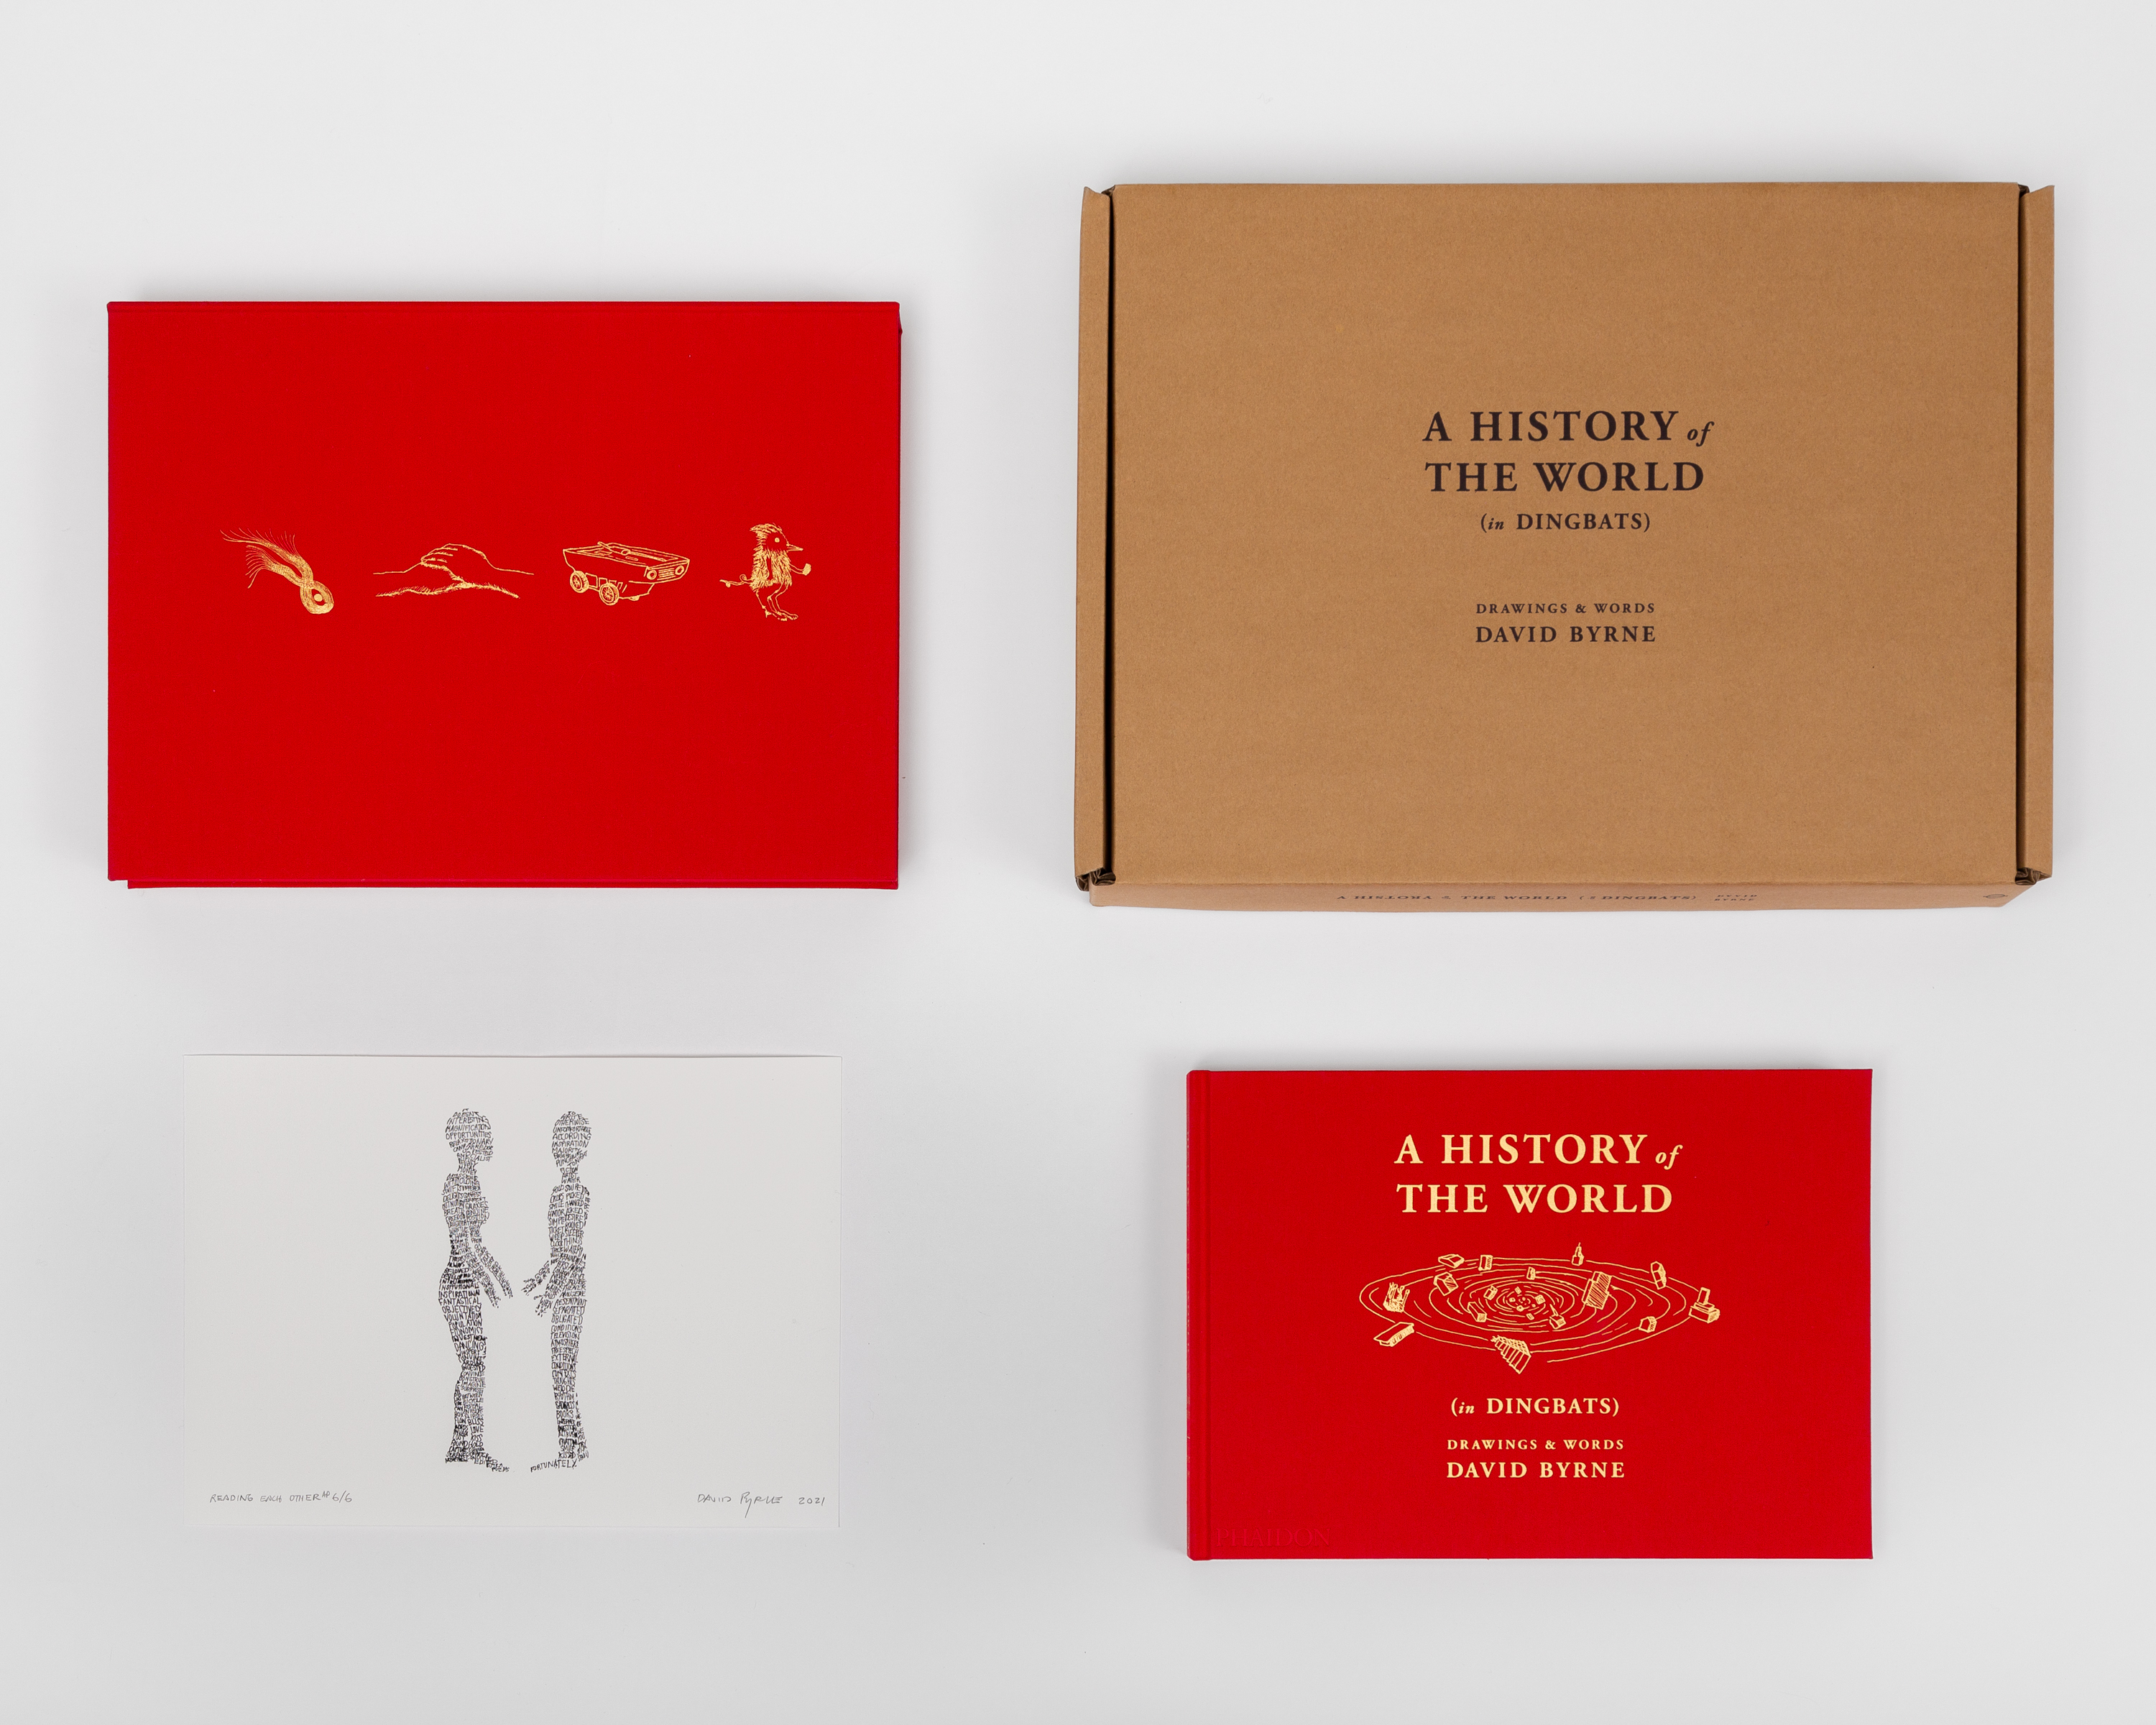 Phaidon's A History of the World (in Dingbats) limited edition book and  Digital archival 